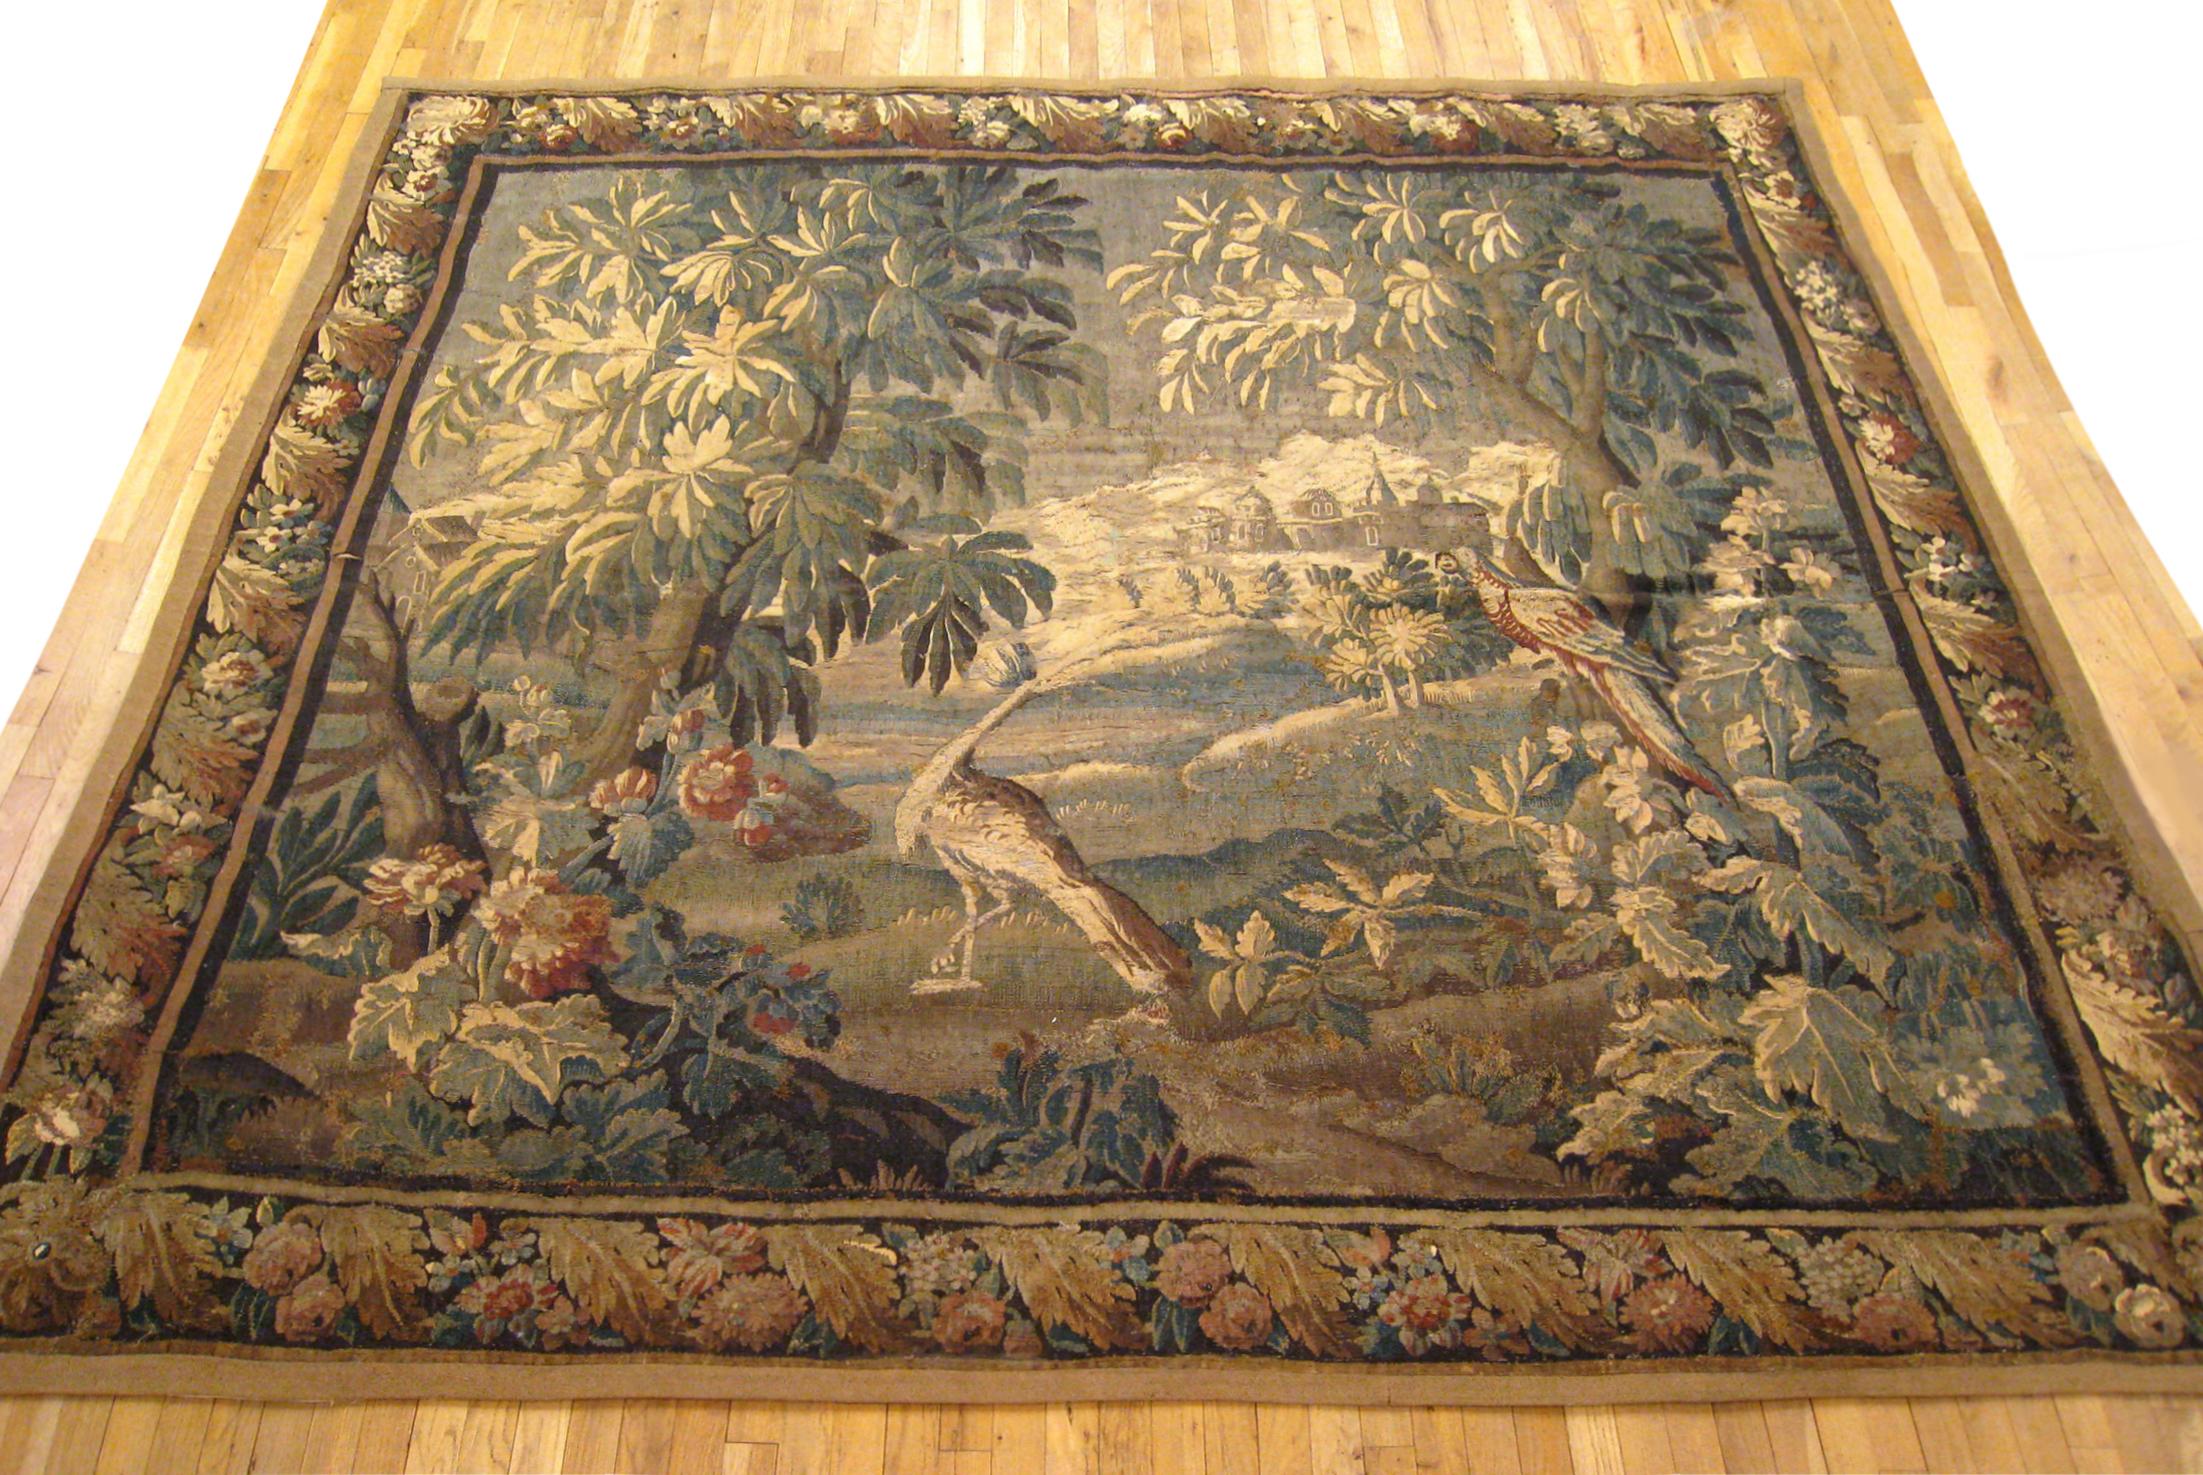 An antique 18th century French Felletin verdure landscape tapestry, size 8'10 H x 9'7 W. This handwoven antique wall hanging features two exotic birds at centre in the midst of greenery, trees, flowers, and acanthus plants. The central scene is